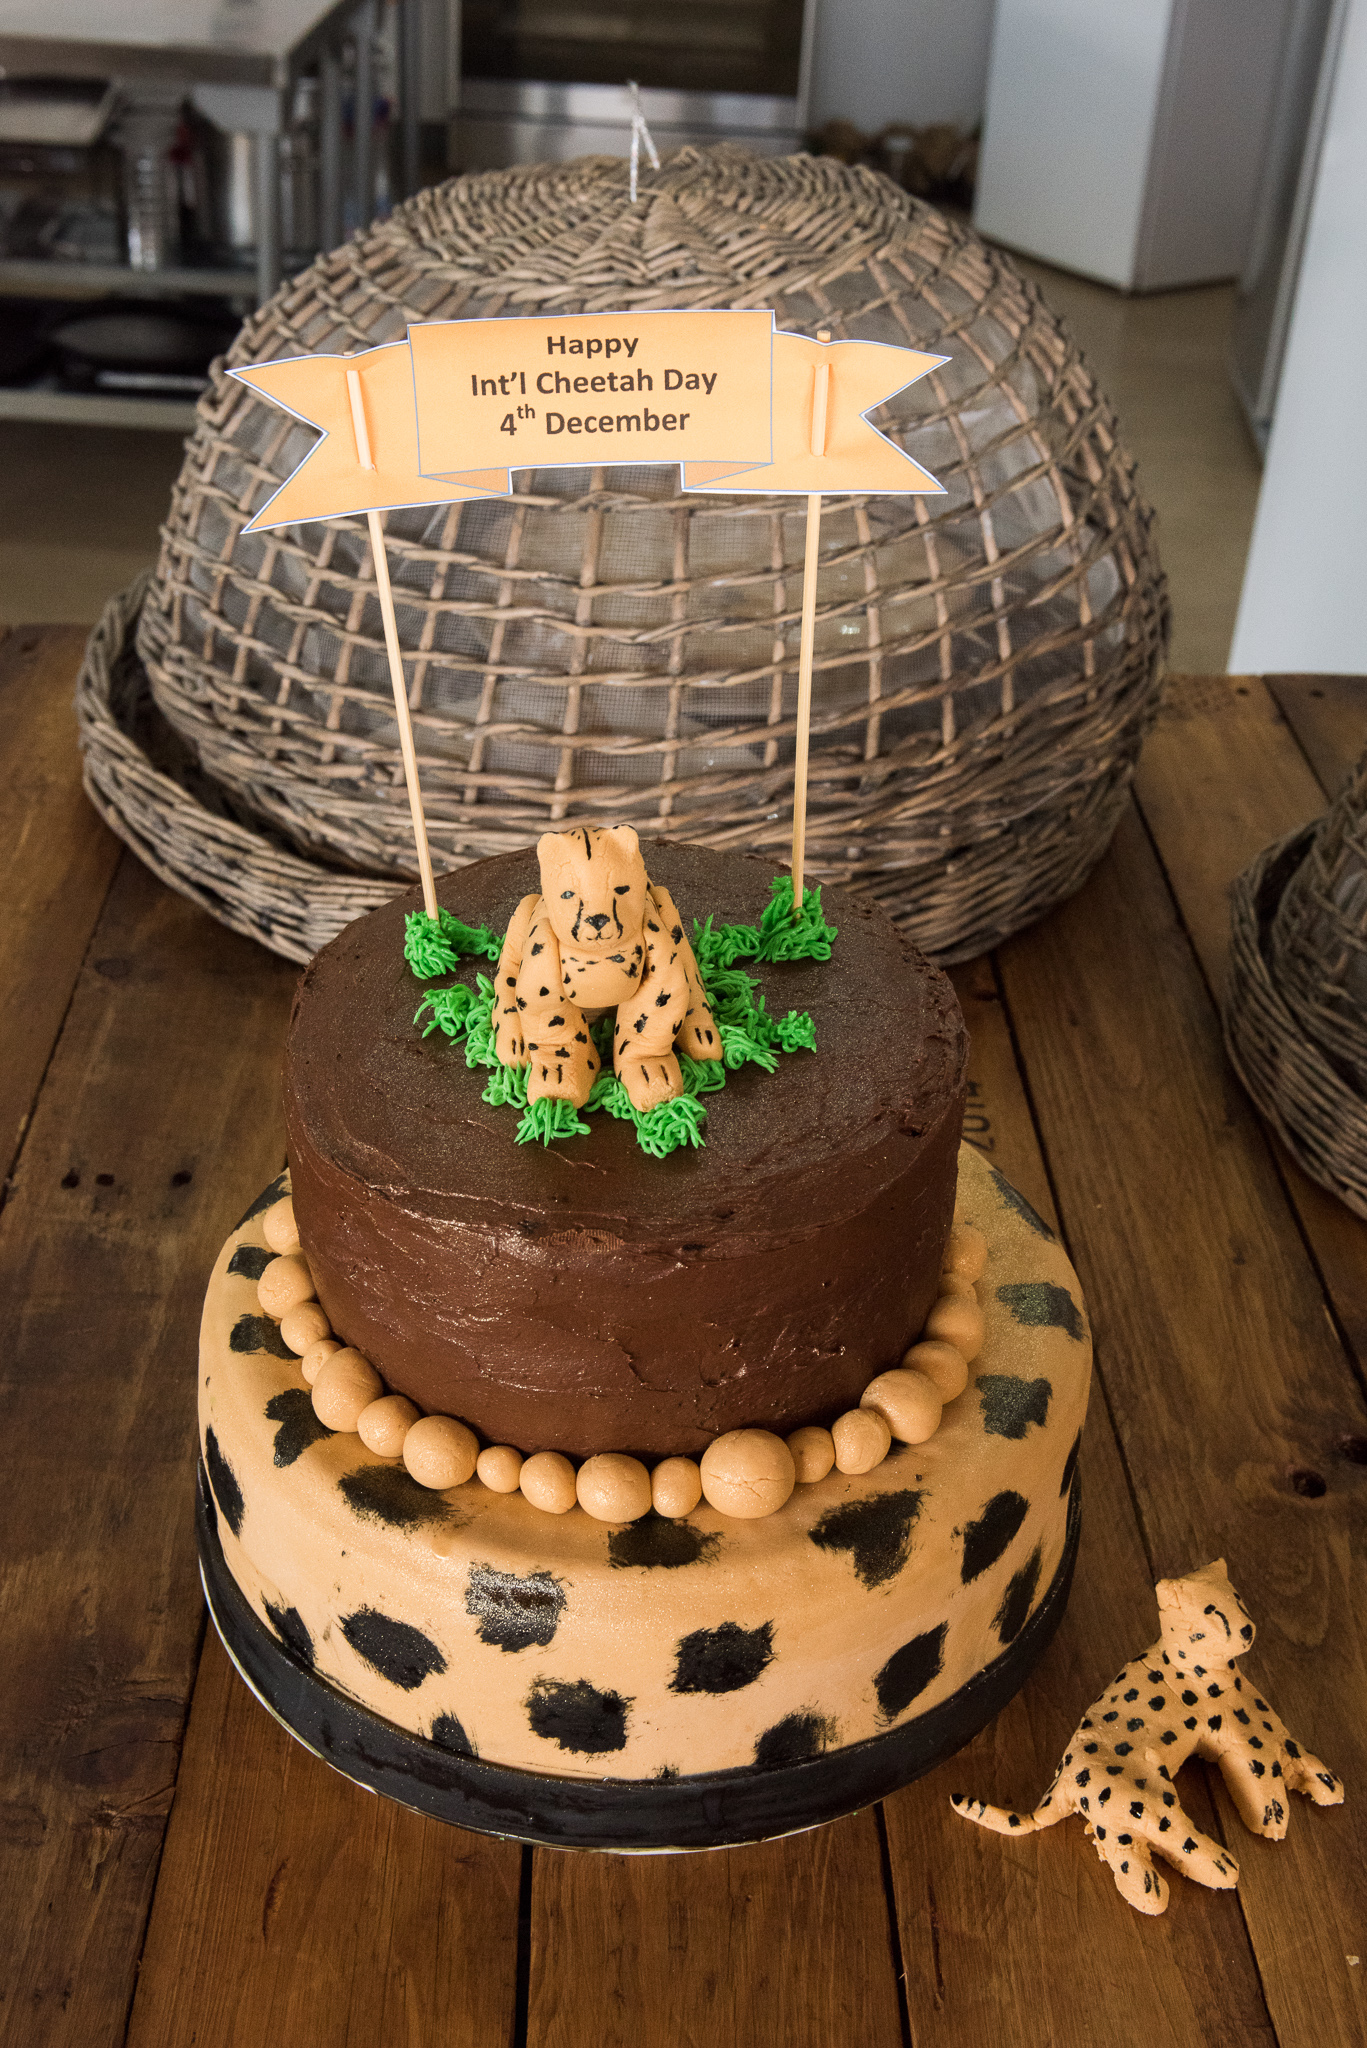 Human visitors at CCF Namibia will enjoy a piece of this chocolate cake in celebration of International Cheetah Day.